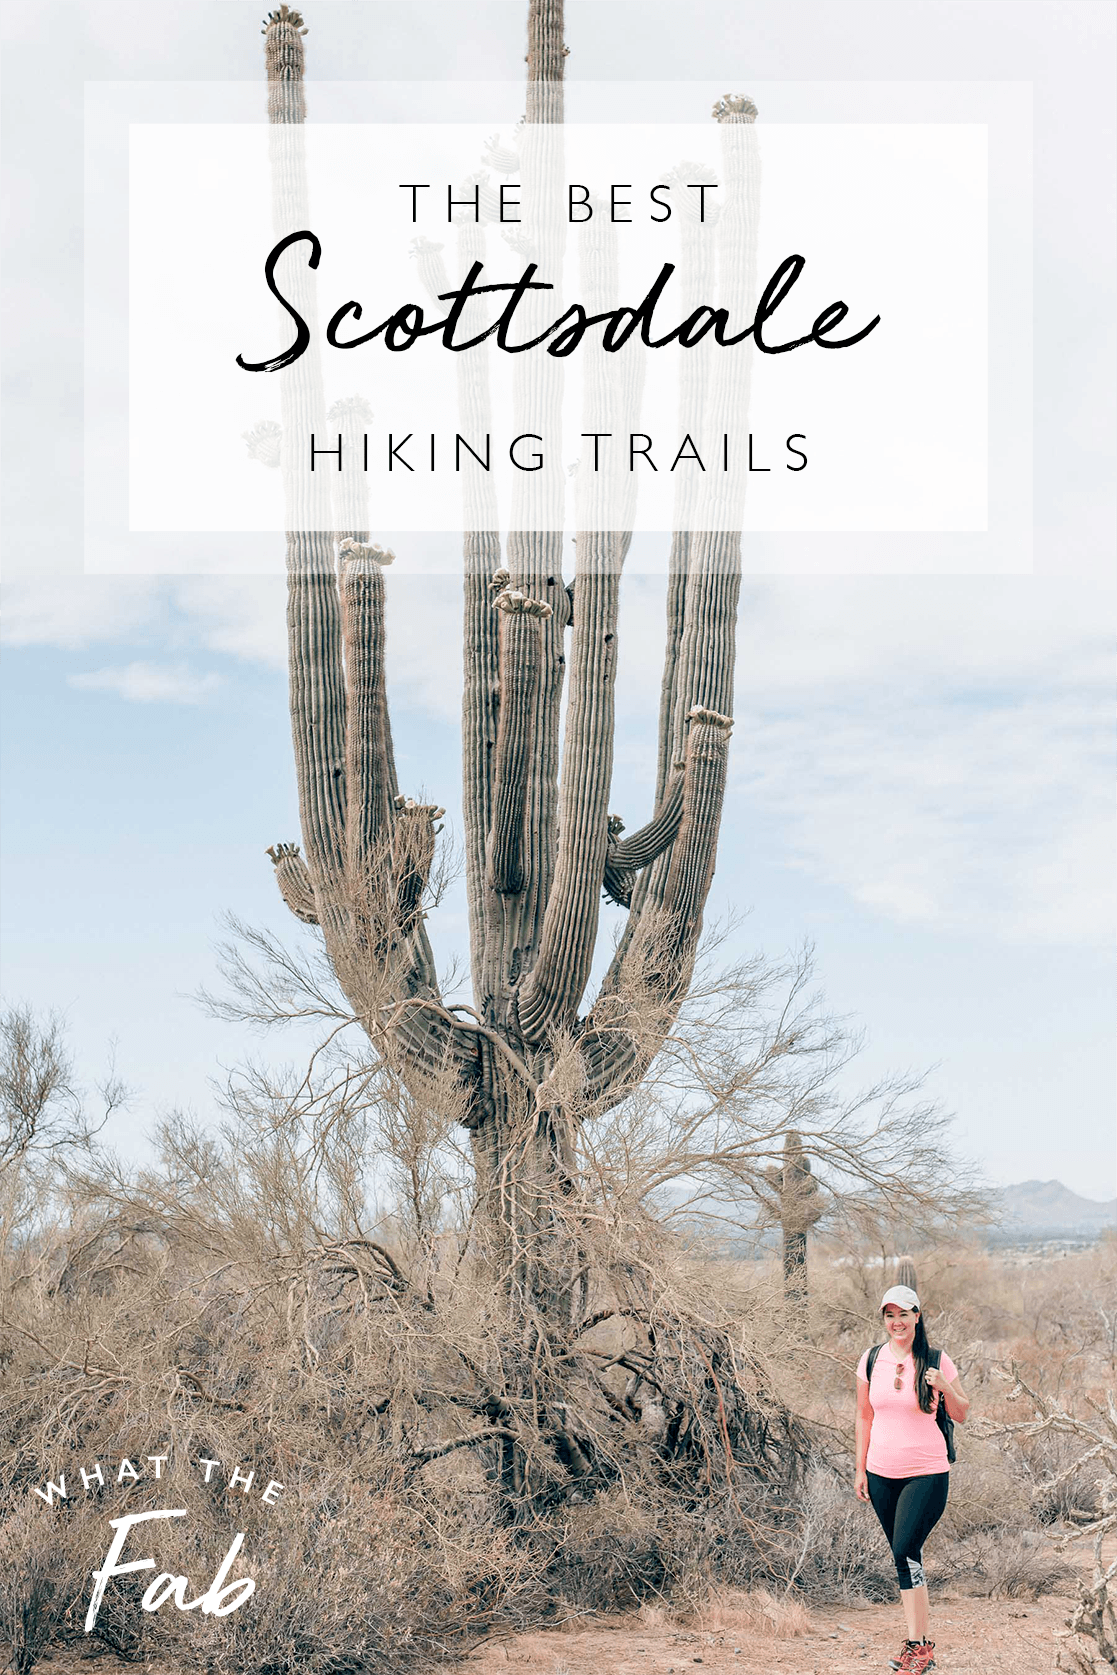 Best Scottsdale Hiking Trails, by Travel Blogger What The Fab